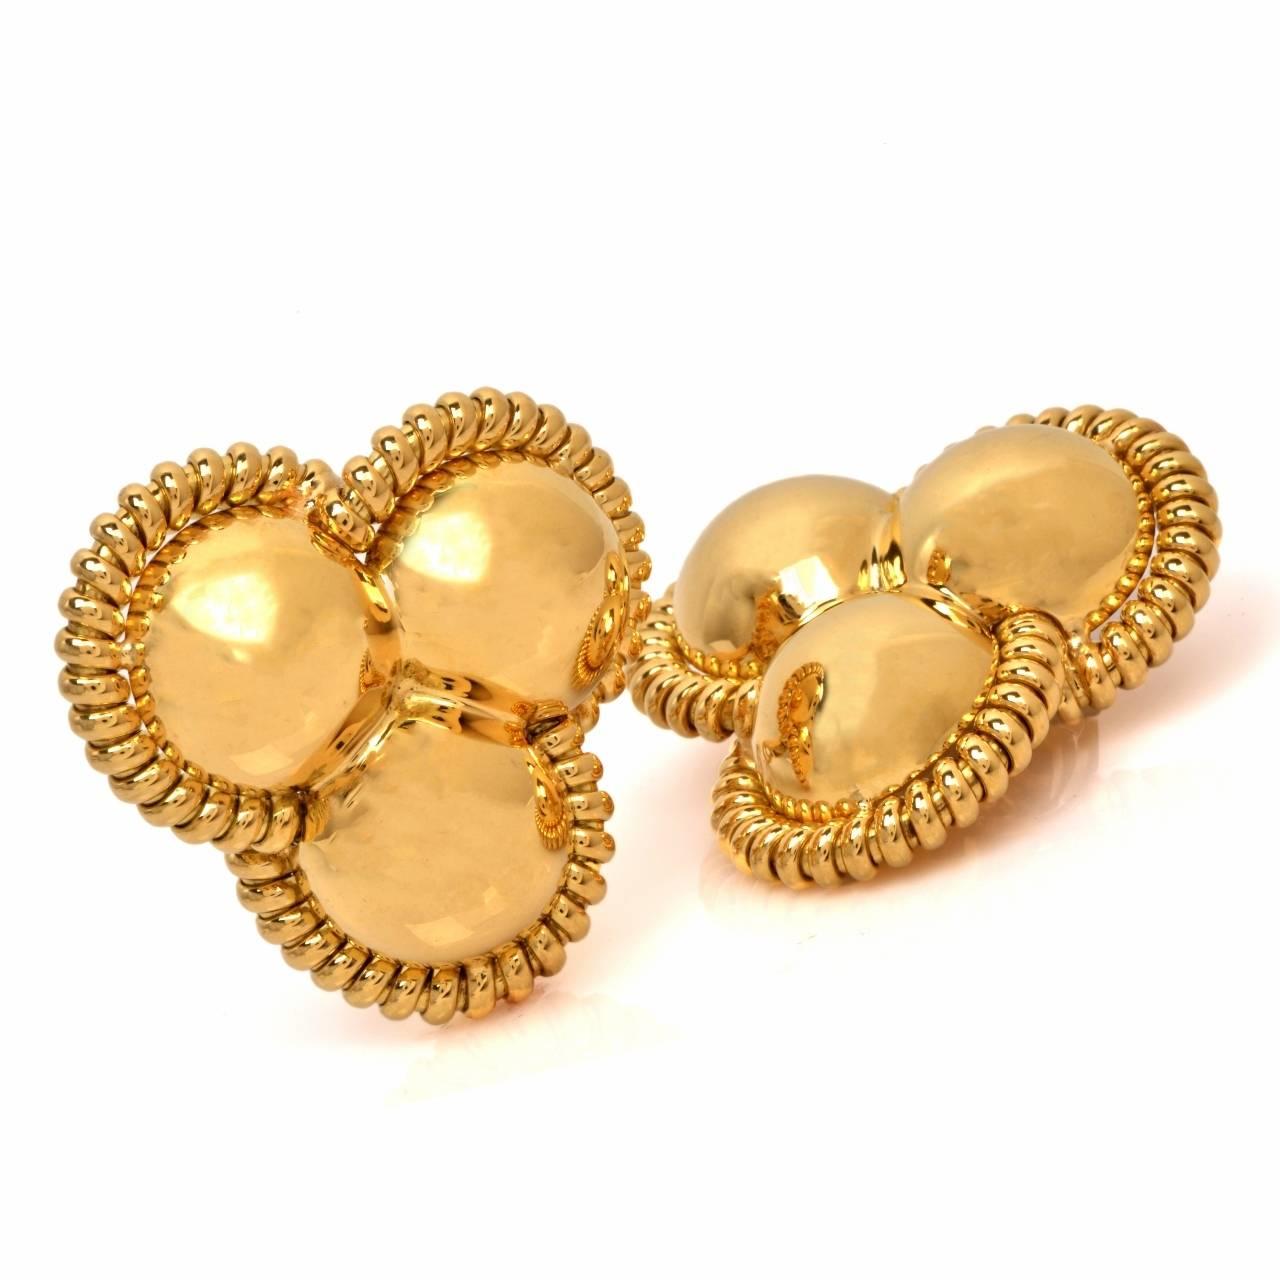 These Charming and elegant Italian earrings of bold and opulent aesthetic are crafted in solid 18K yellow gold, weigh 41.7 grams and measure 40 mm x 40 mm. These highly ornate high polish earrings incorporate each an assemblage of three overlapping